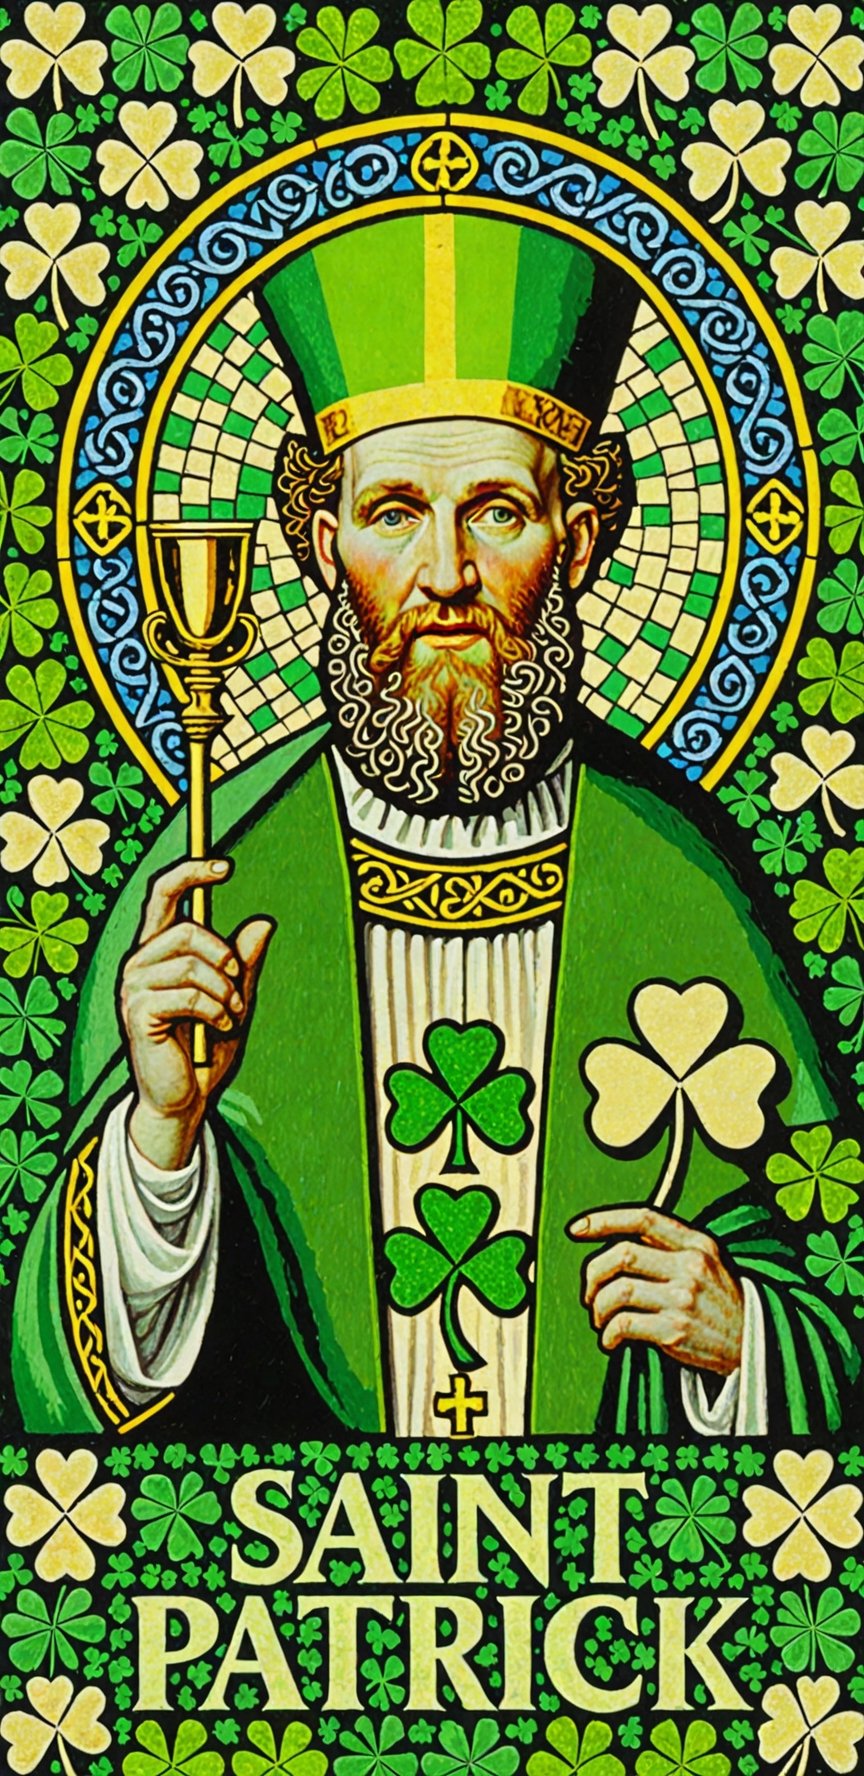 (masterpiece, best quality, ultra-detailed), Image of Saint Patrick, four leaf clover mosaic, with text that says "Saint Patrick"